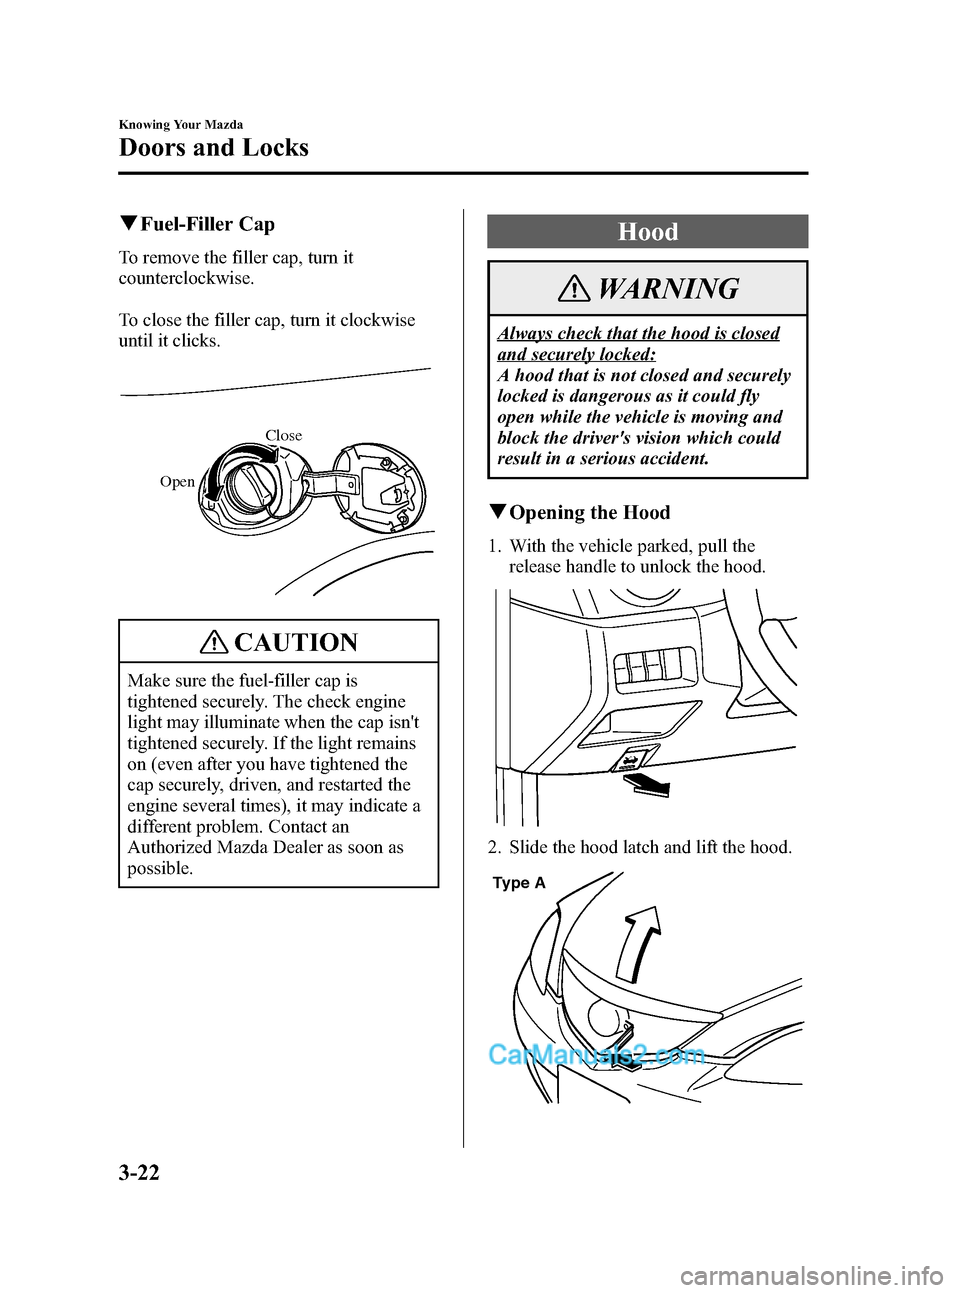 MAZDA MODEL MAZDASPEED 3 2007  Owners Manual (in English) Black plate (96,1)
qFuel-Filler Cap
To remove the filler cap, turn it
counterclockwise.
To close the filler cap, turn it clockwise
until it clicks.
OpenClose
CAUTION
Make sure the fuel-filler cap is
t